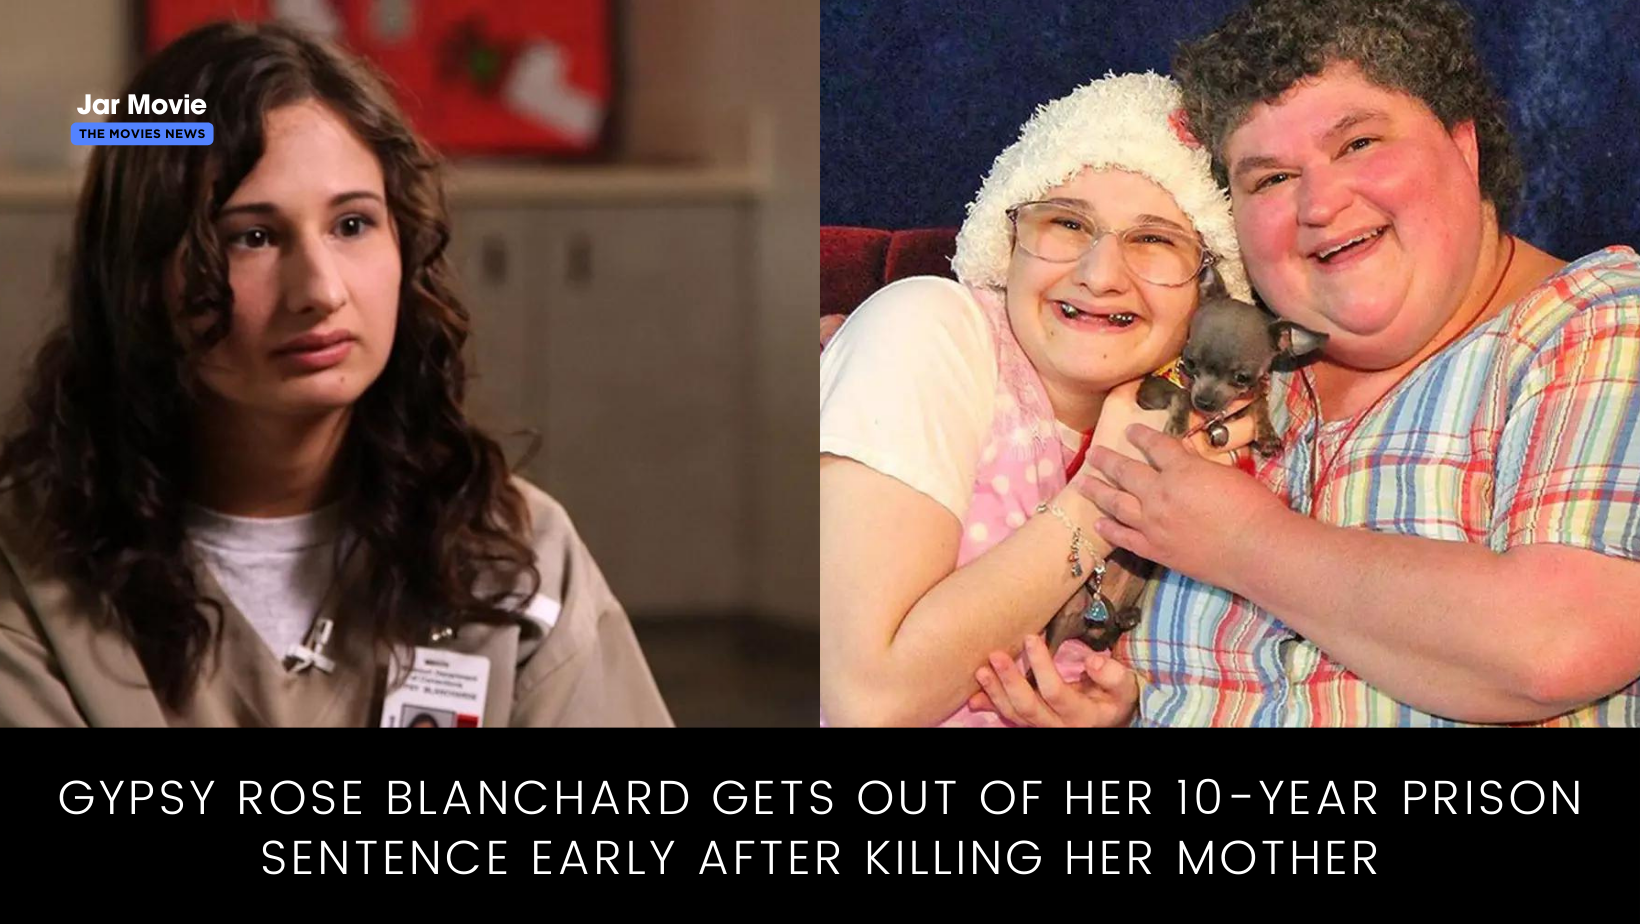 Gypsy Rose Blanchard gets out of her 10-year prison sentence early after killing her mother